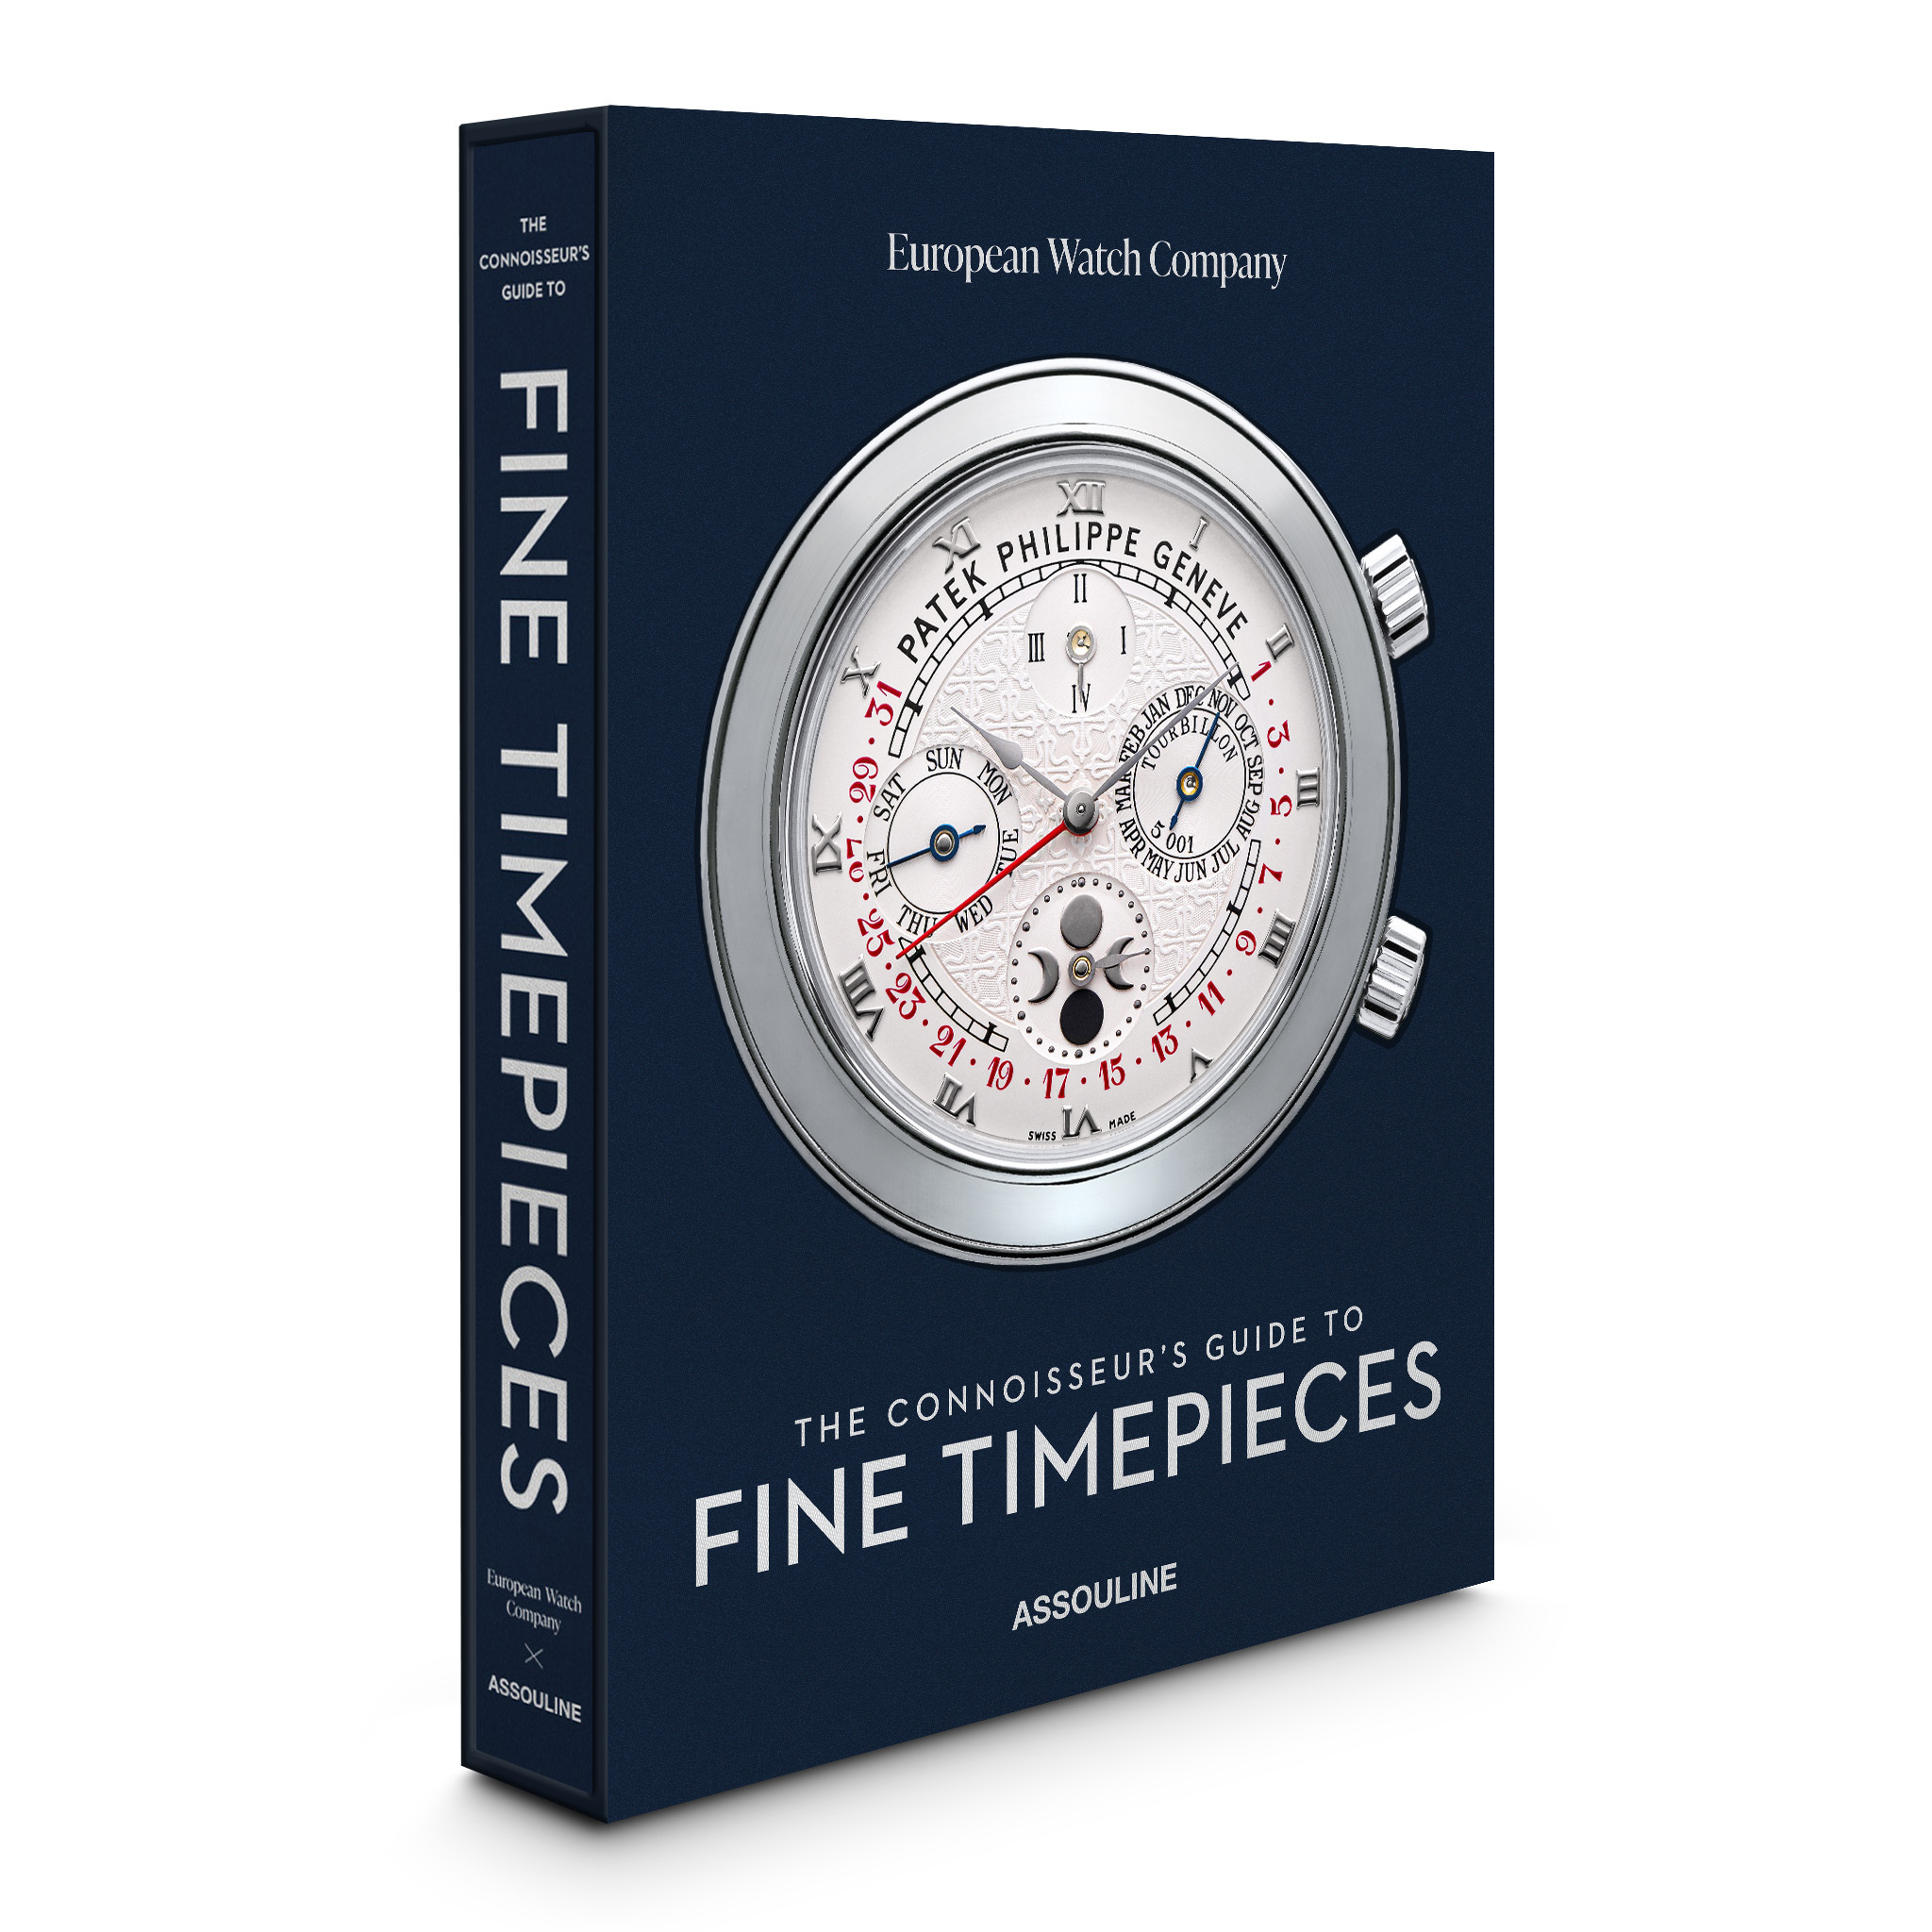 The Connoisseur's Guide to Fine Timepieces